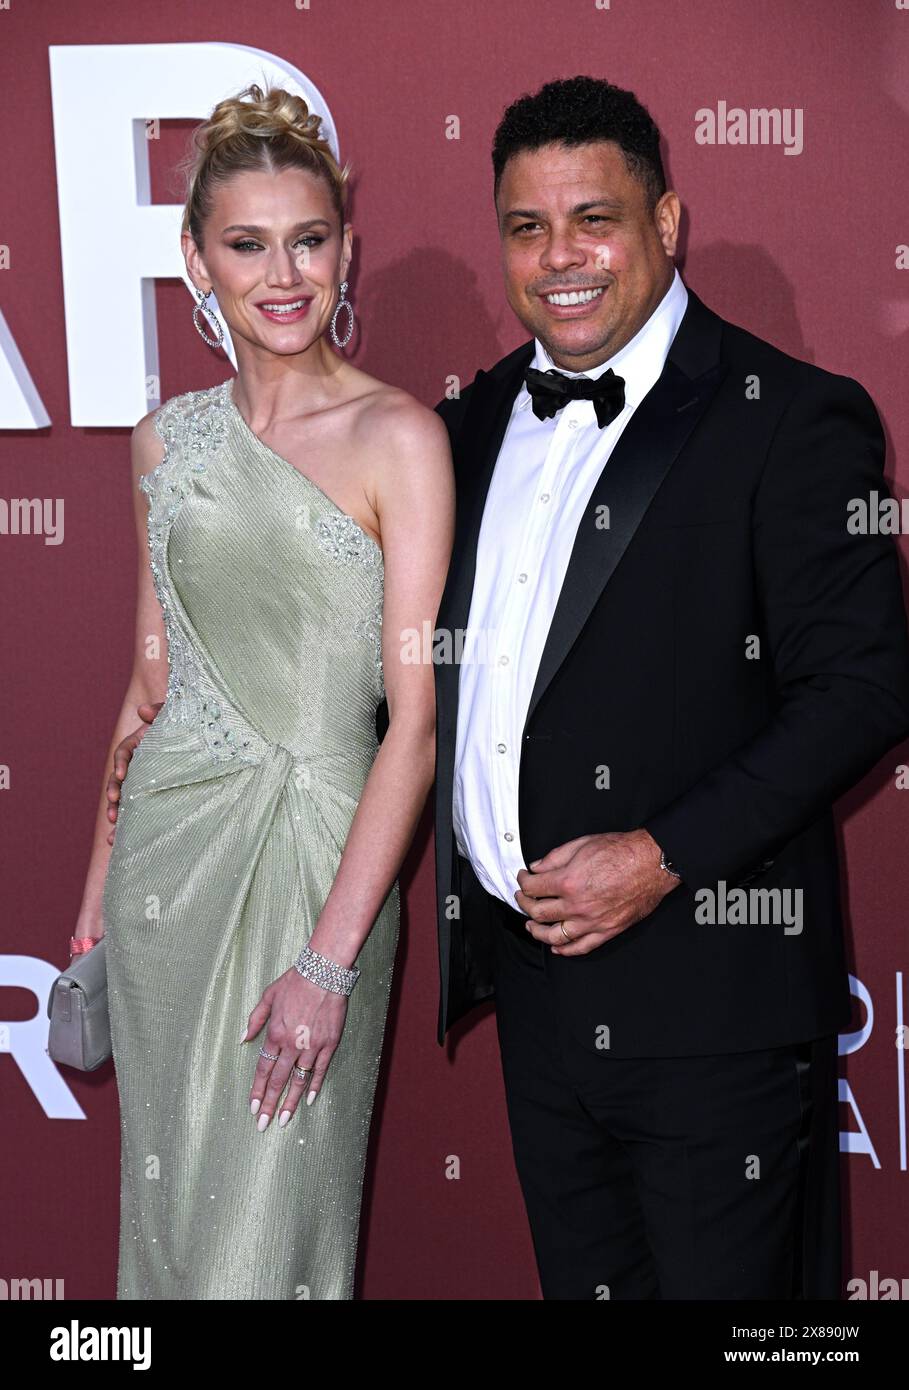 Cannes, France. May 23rd, 2024. Celina Locks and Ronaldo Luís Nazário de Lima arriving at the 2024 amfAR Gala Cannes, Hotel du Cap Eden Roc. Part of the 77th edition of The Cannes Film Festival. Credit: Doug Peters/EMPICS/Alamy Live News Stock Photo